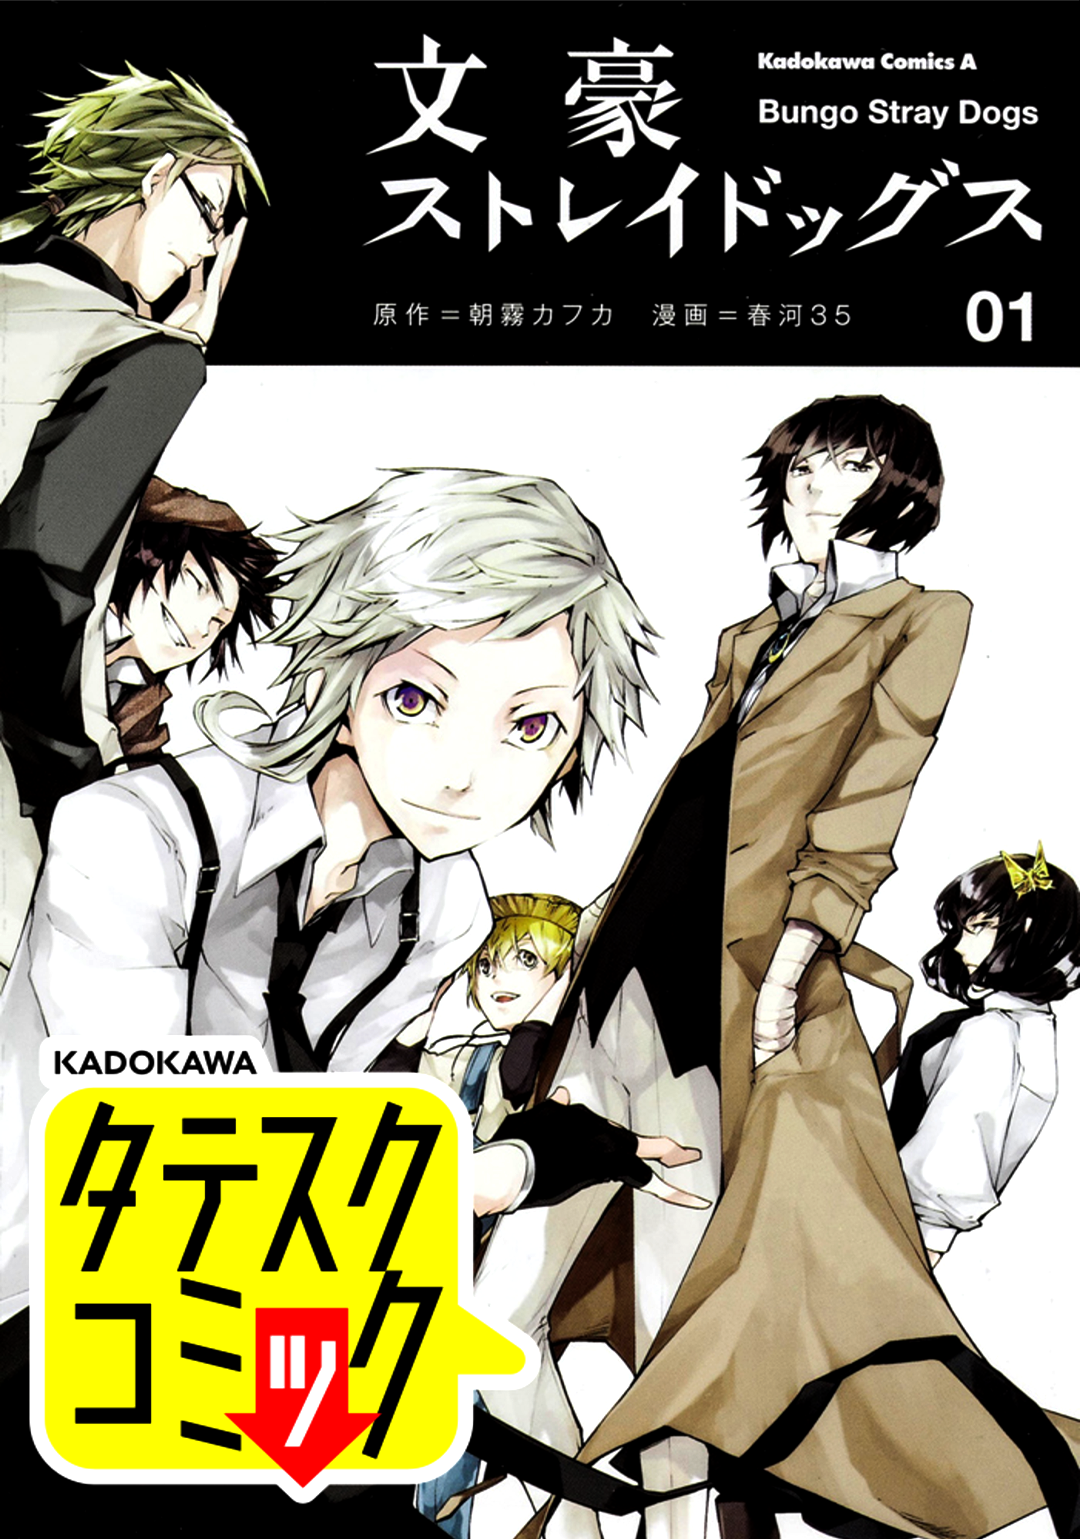 Bungo Stray Dogs (Vertical Comic)